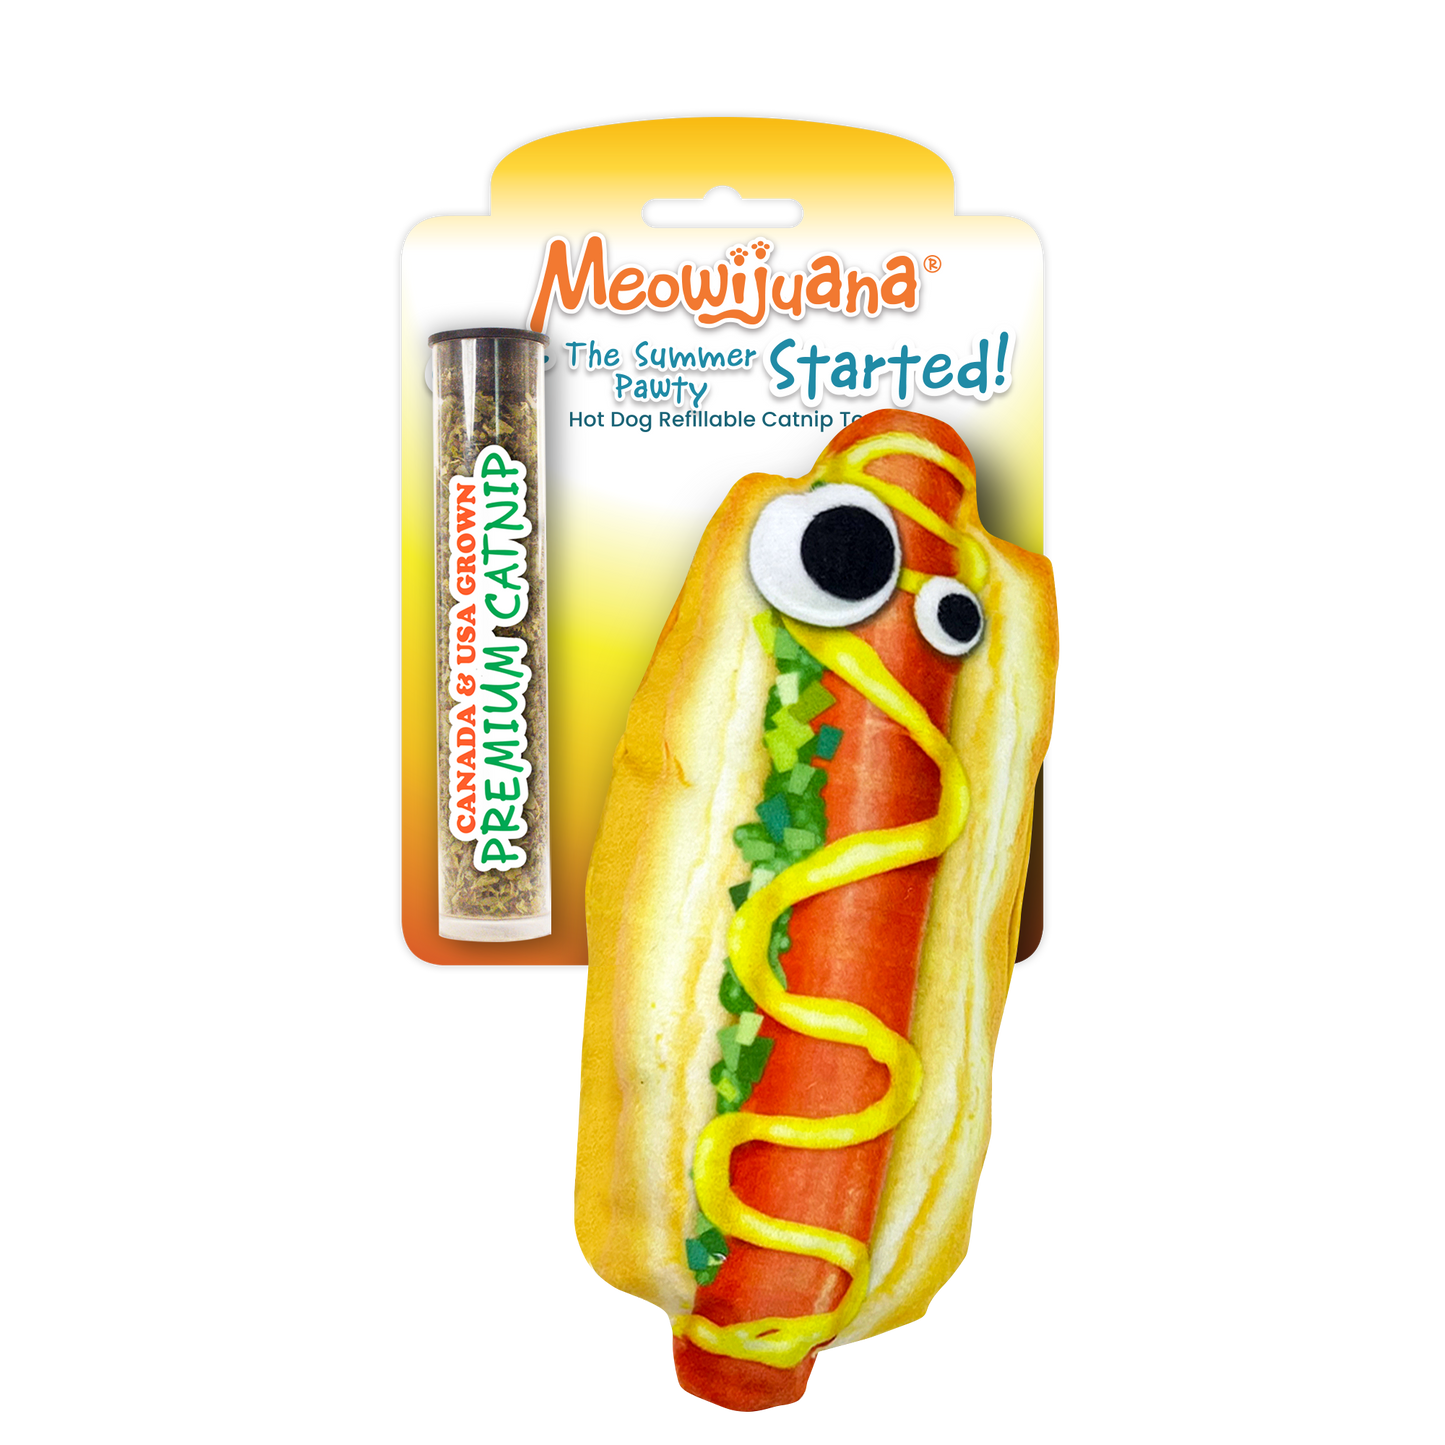 Get the Summer Pawty Started Refillable Hot Dog